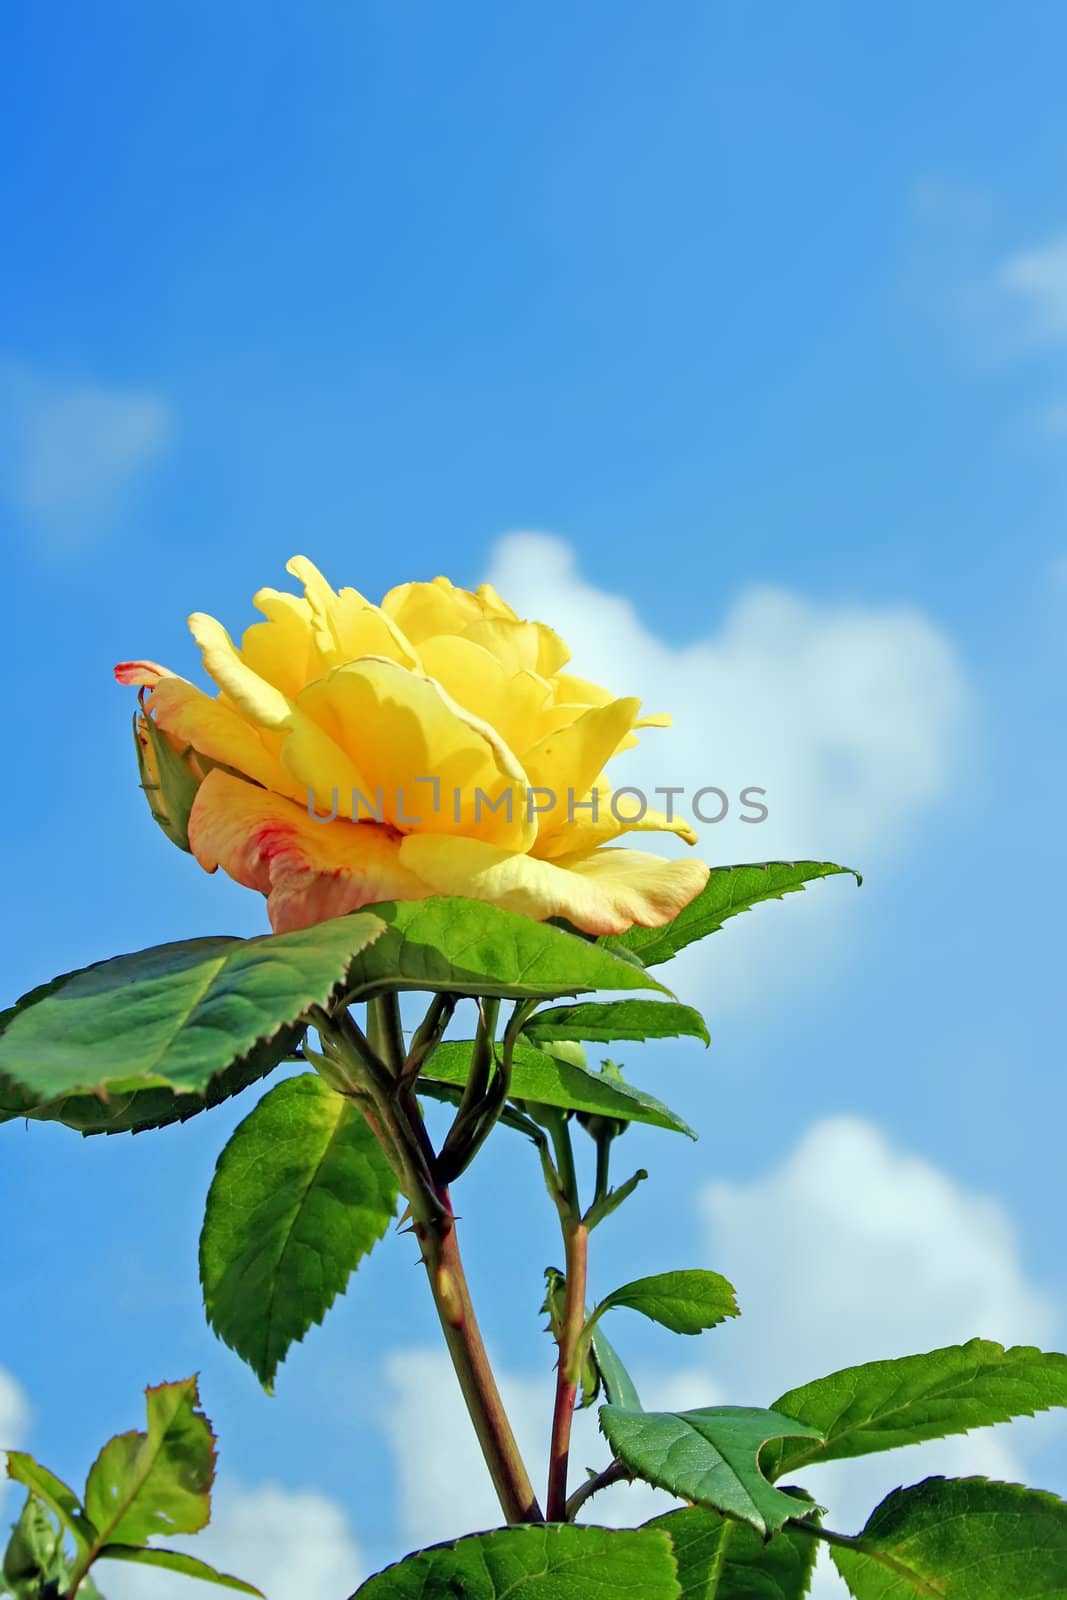 This image shows a macro from a yellow rose